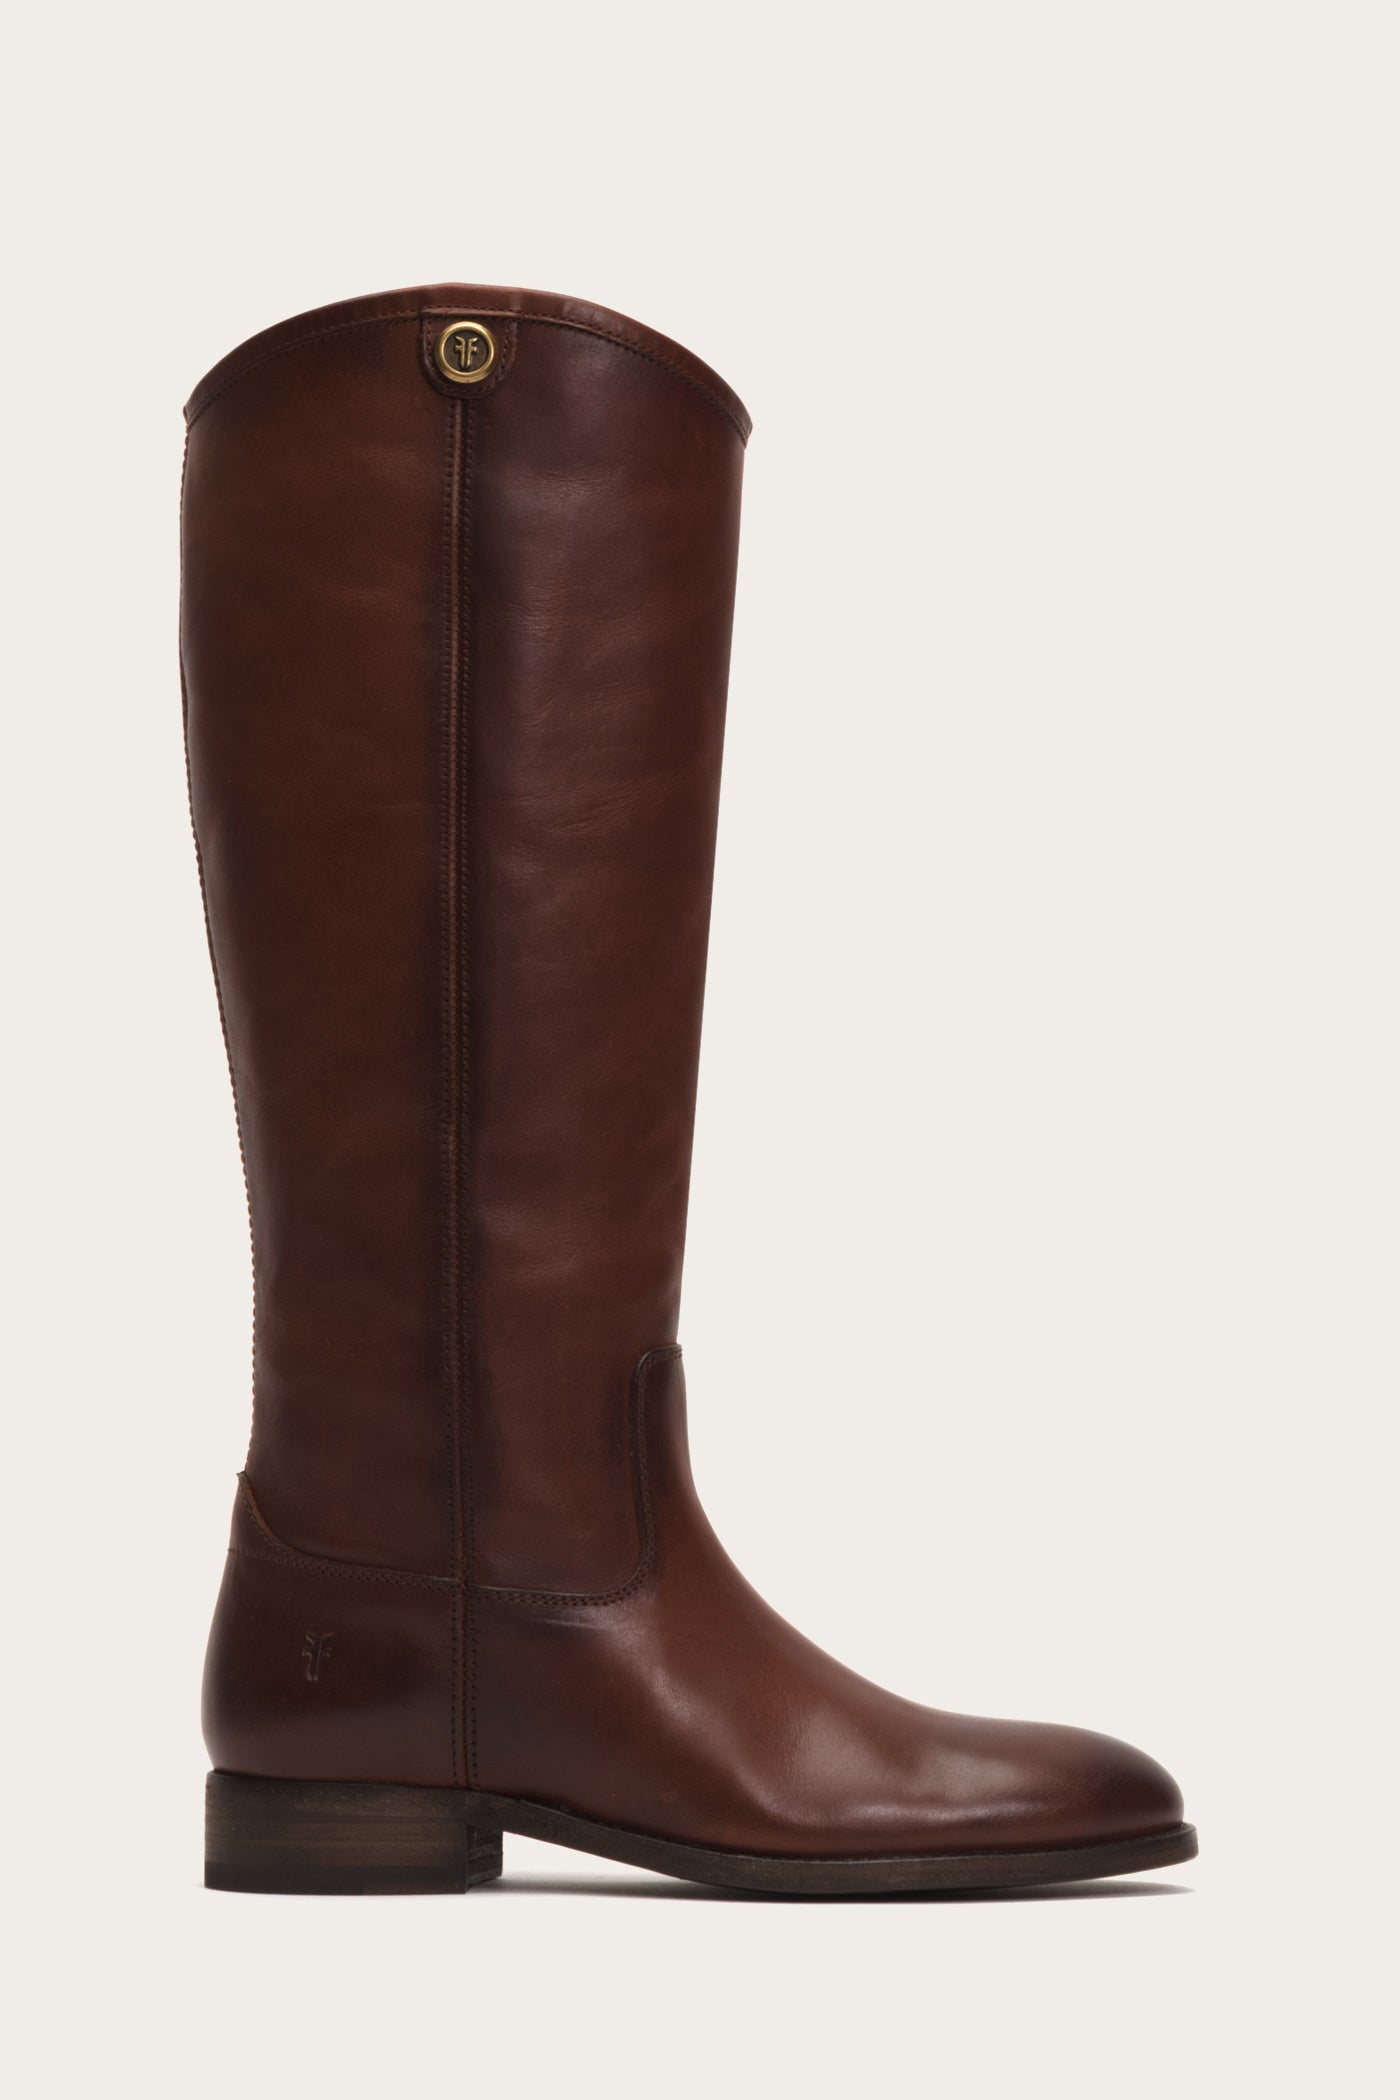 wide calf boots 2 inch circumference